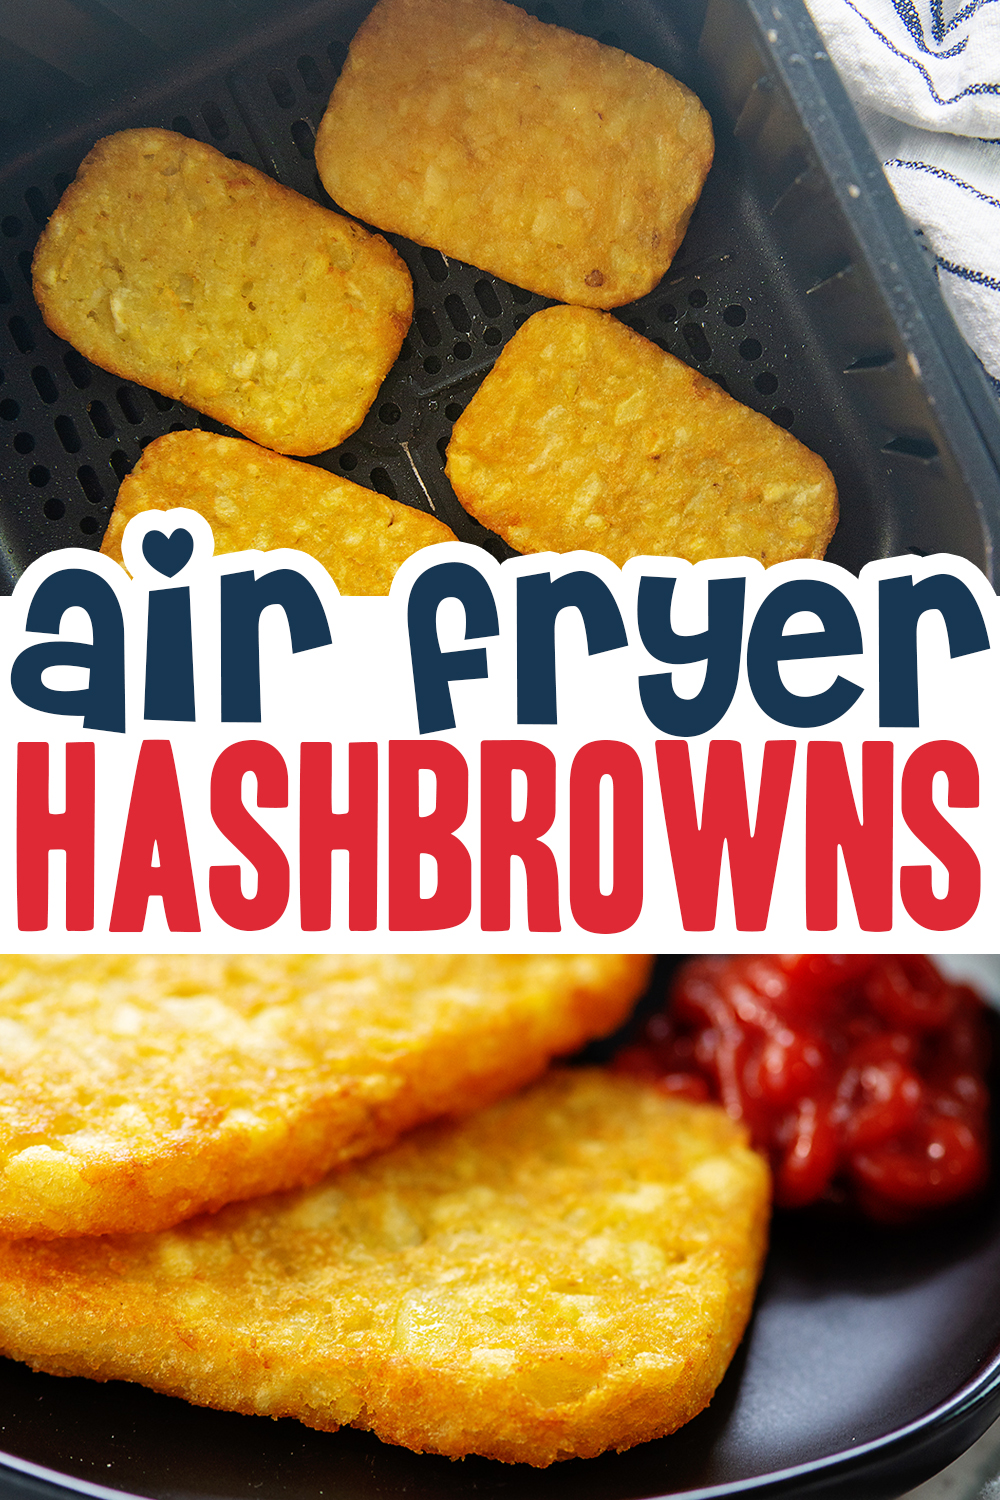 These air fried hasbrowns were easy to make, and totally delicious!  The come out nice and crisp, perfect for breakfast or a snack!